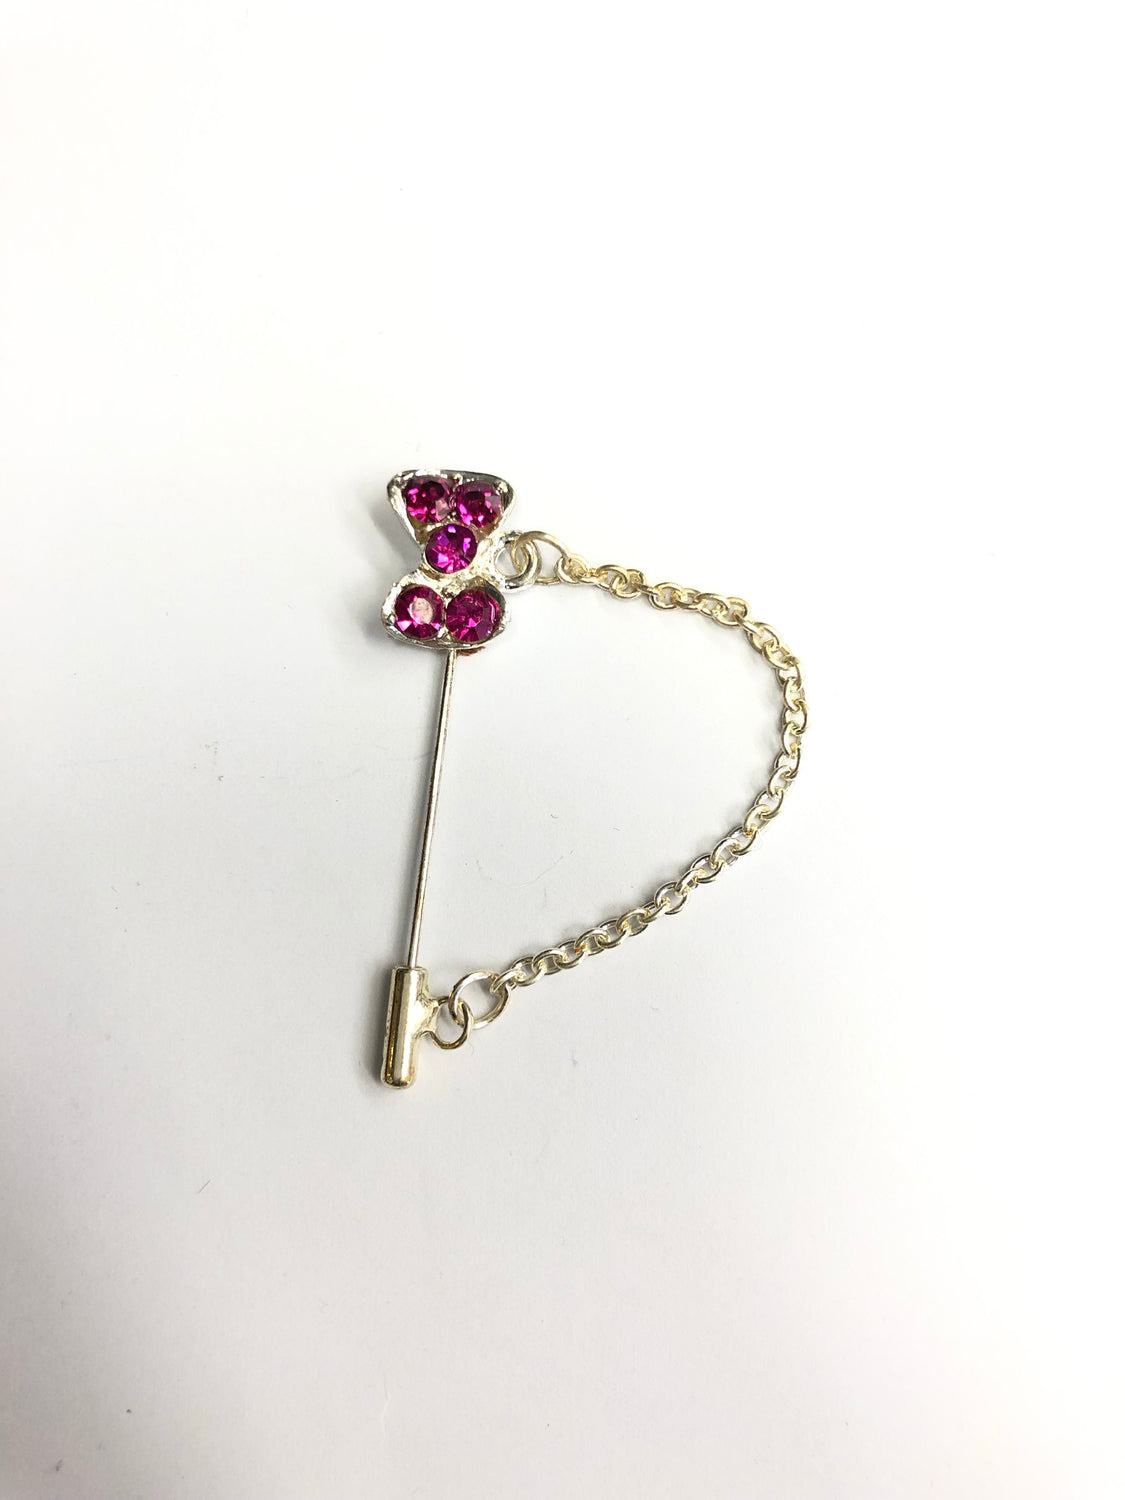 silver clasp pin with hot pink bow jewel and a chain